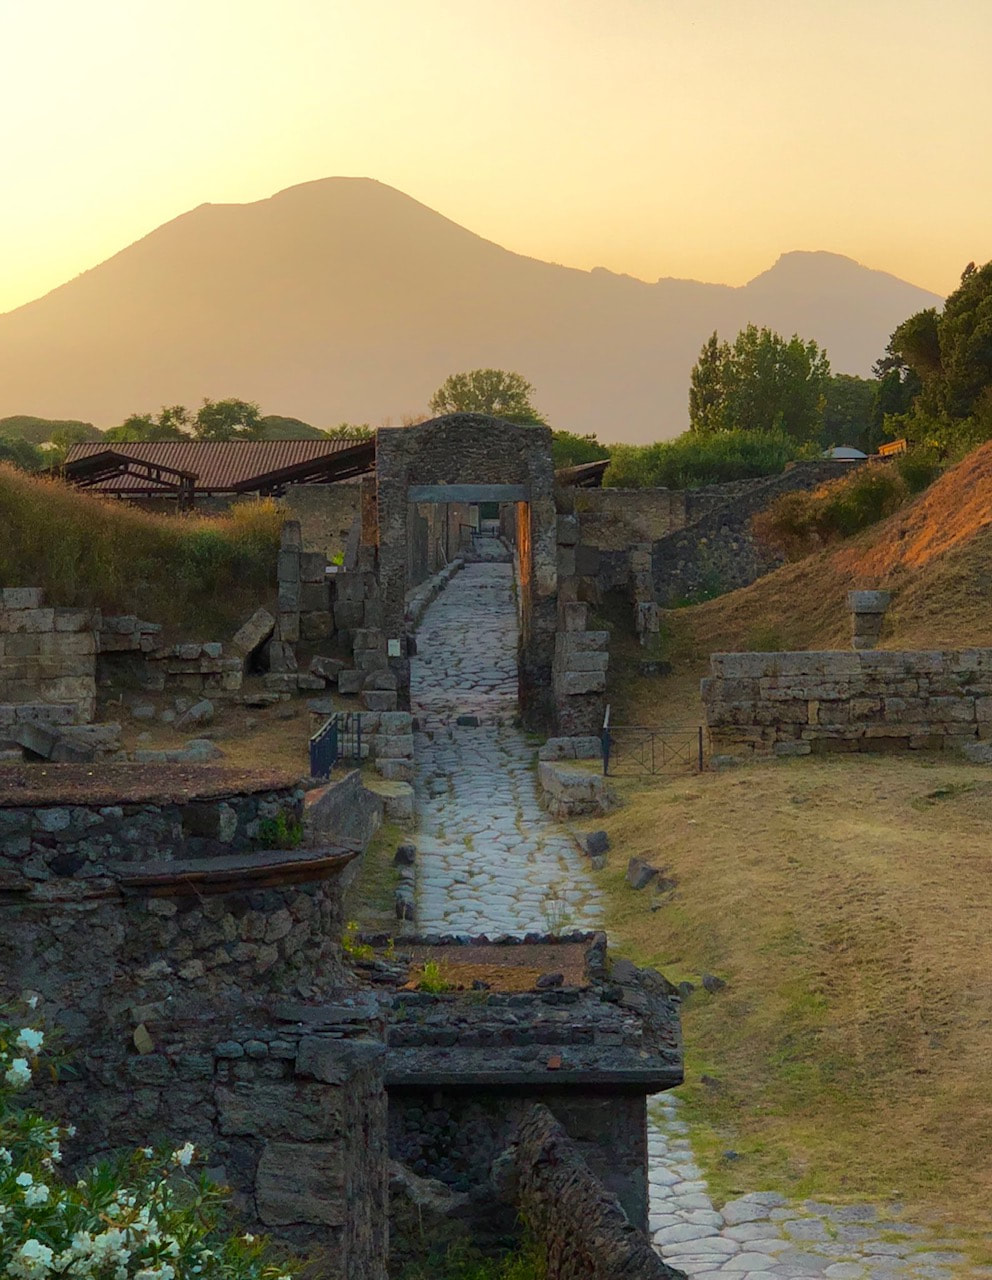 Image of Pompeii's ruins in the morning sunlight.